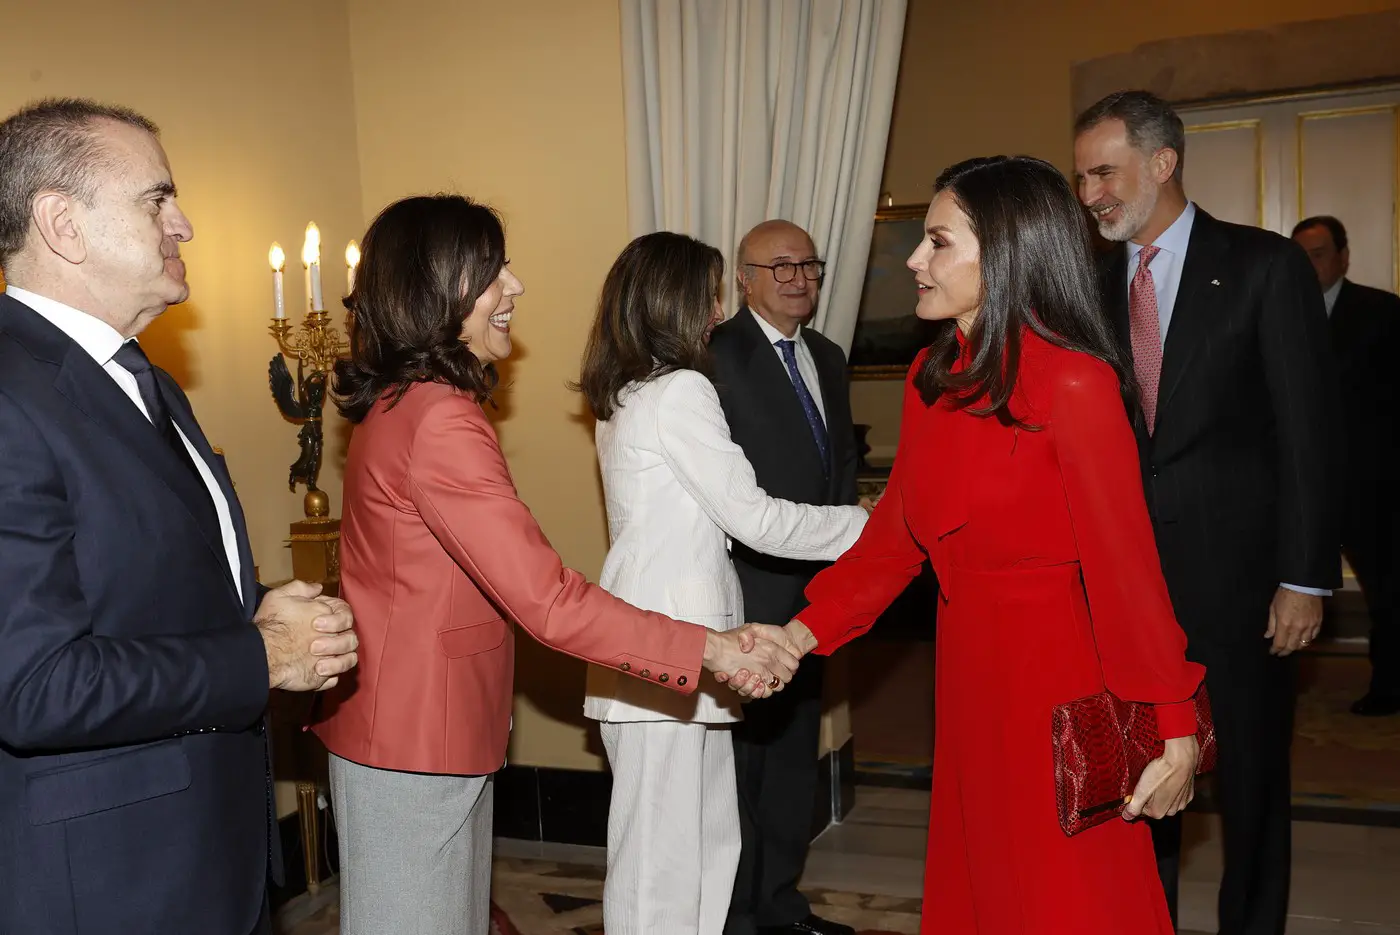 King Felipe and Queen Letizia presented the Accreditation to the new ambassadors of Spain